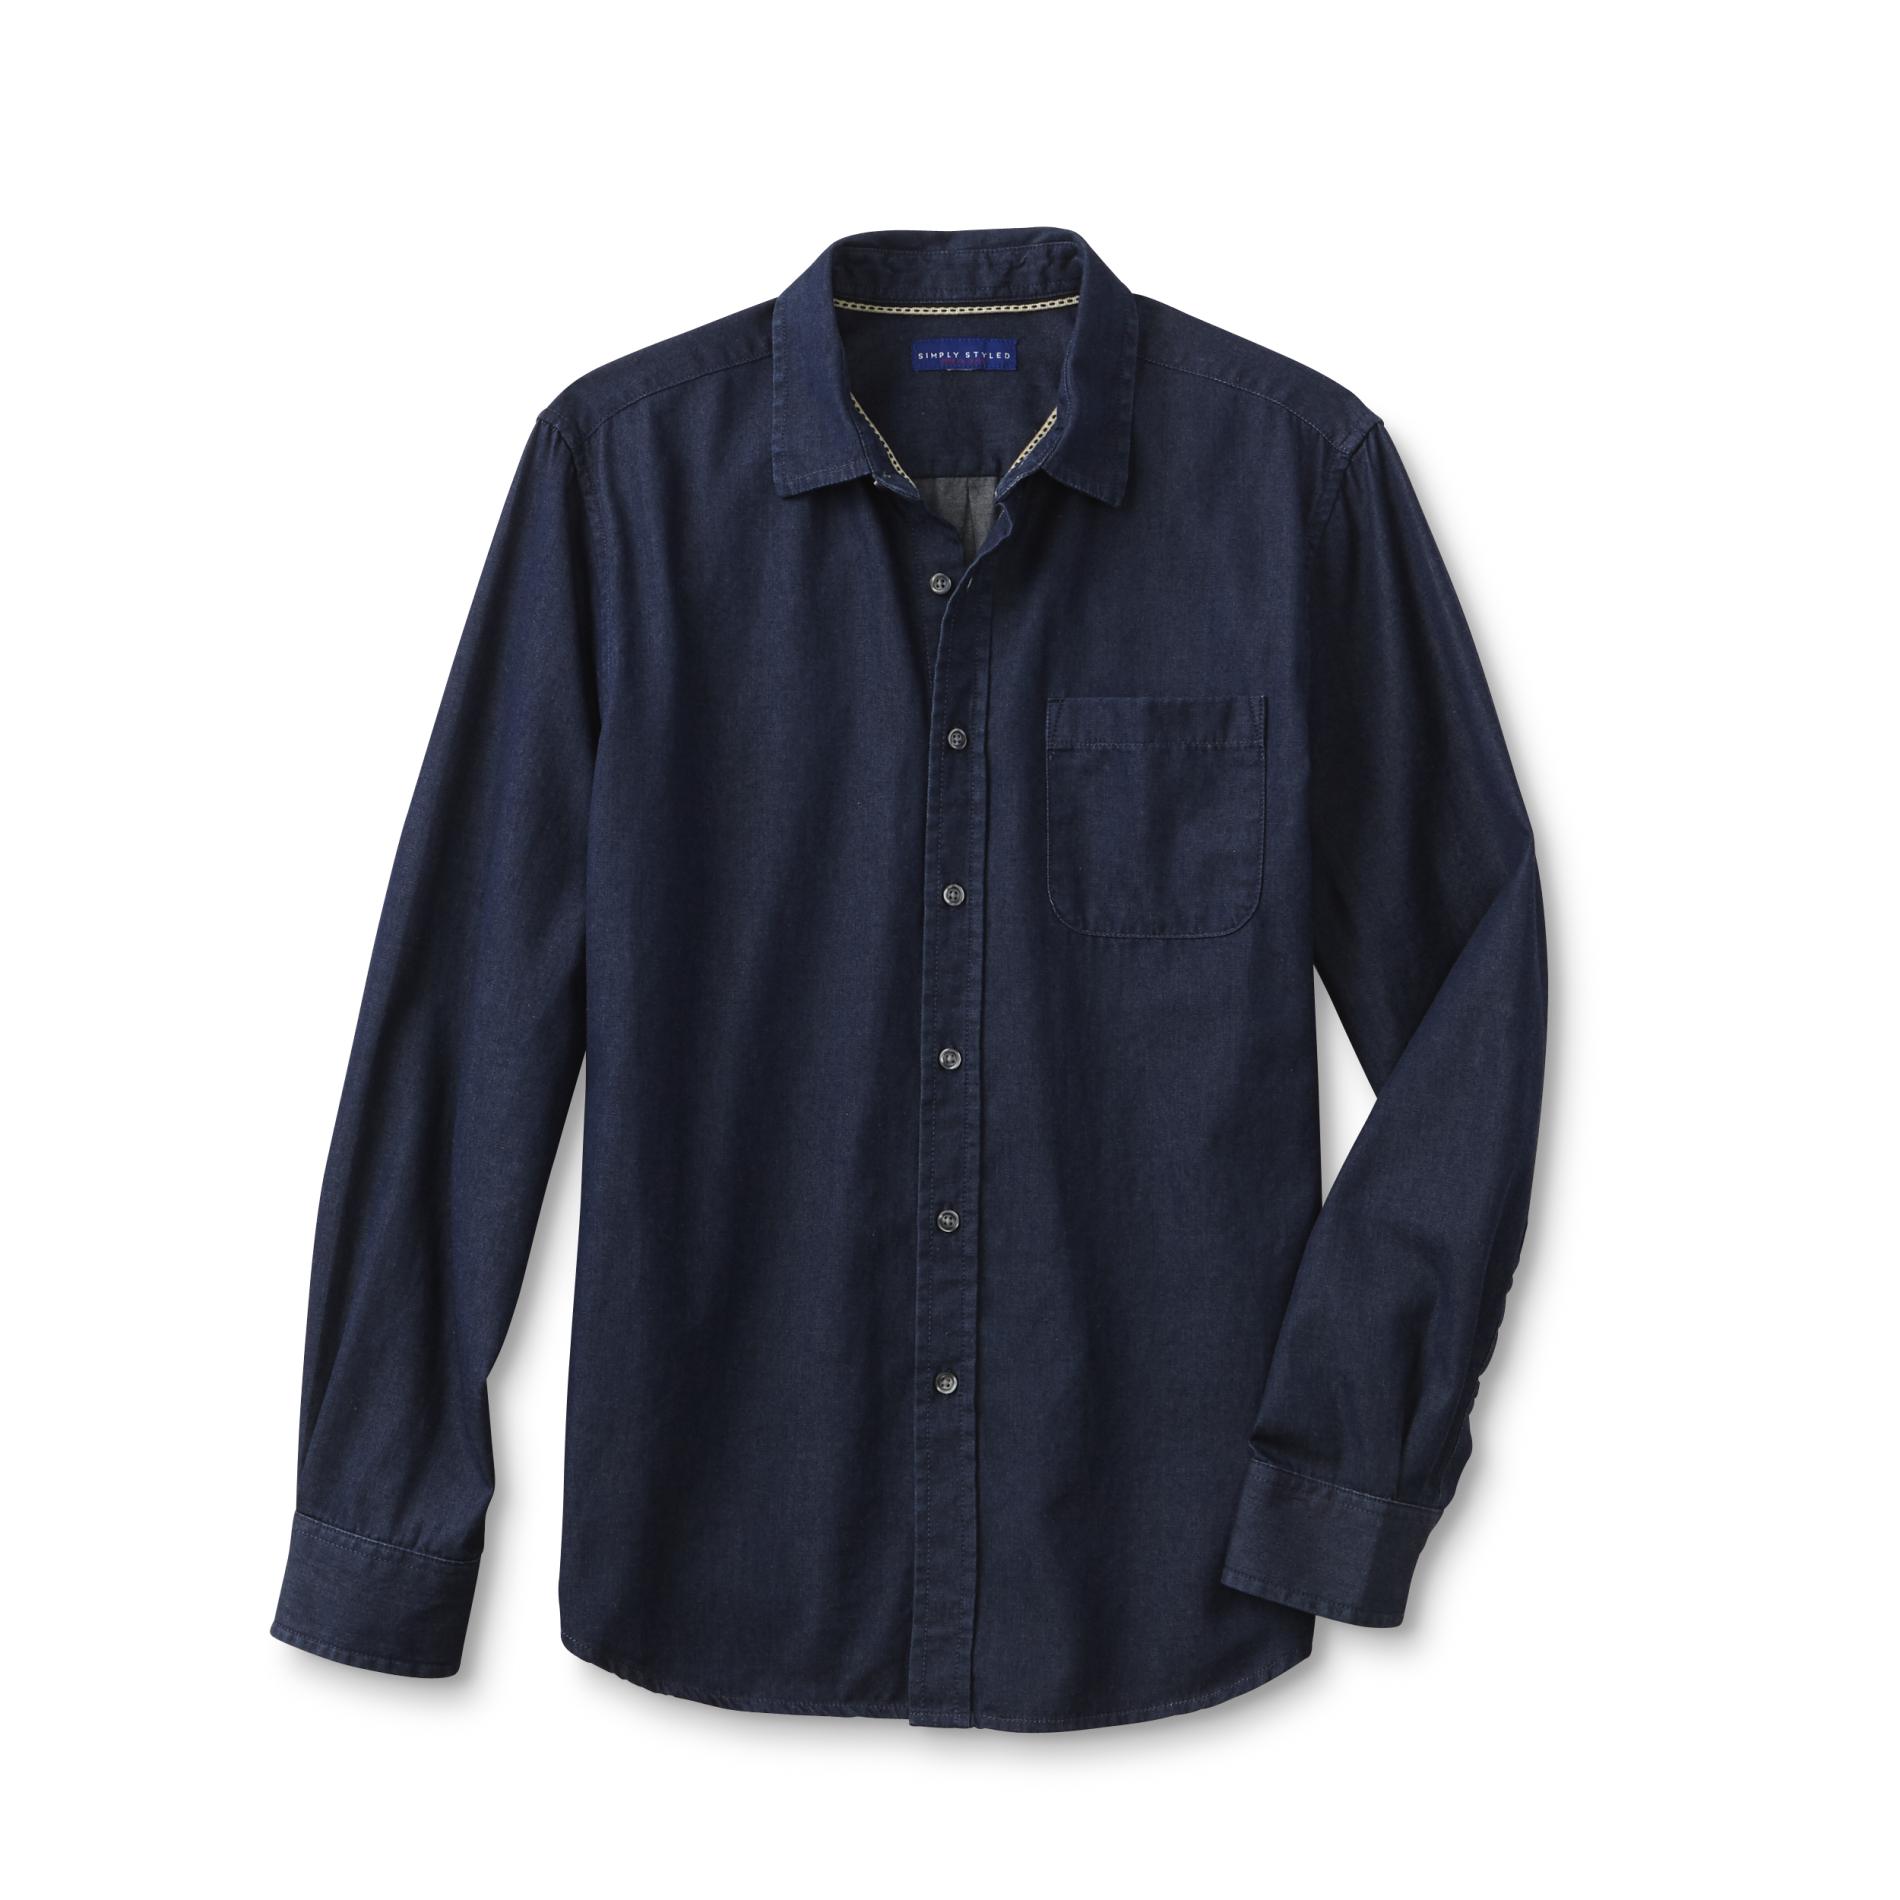 Simply Styled Men's Button-Front Denim Shirt